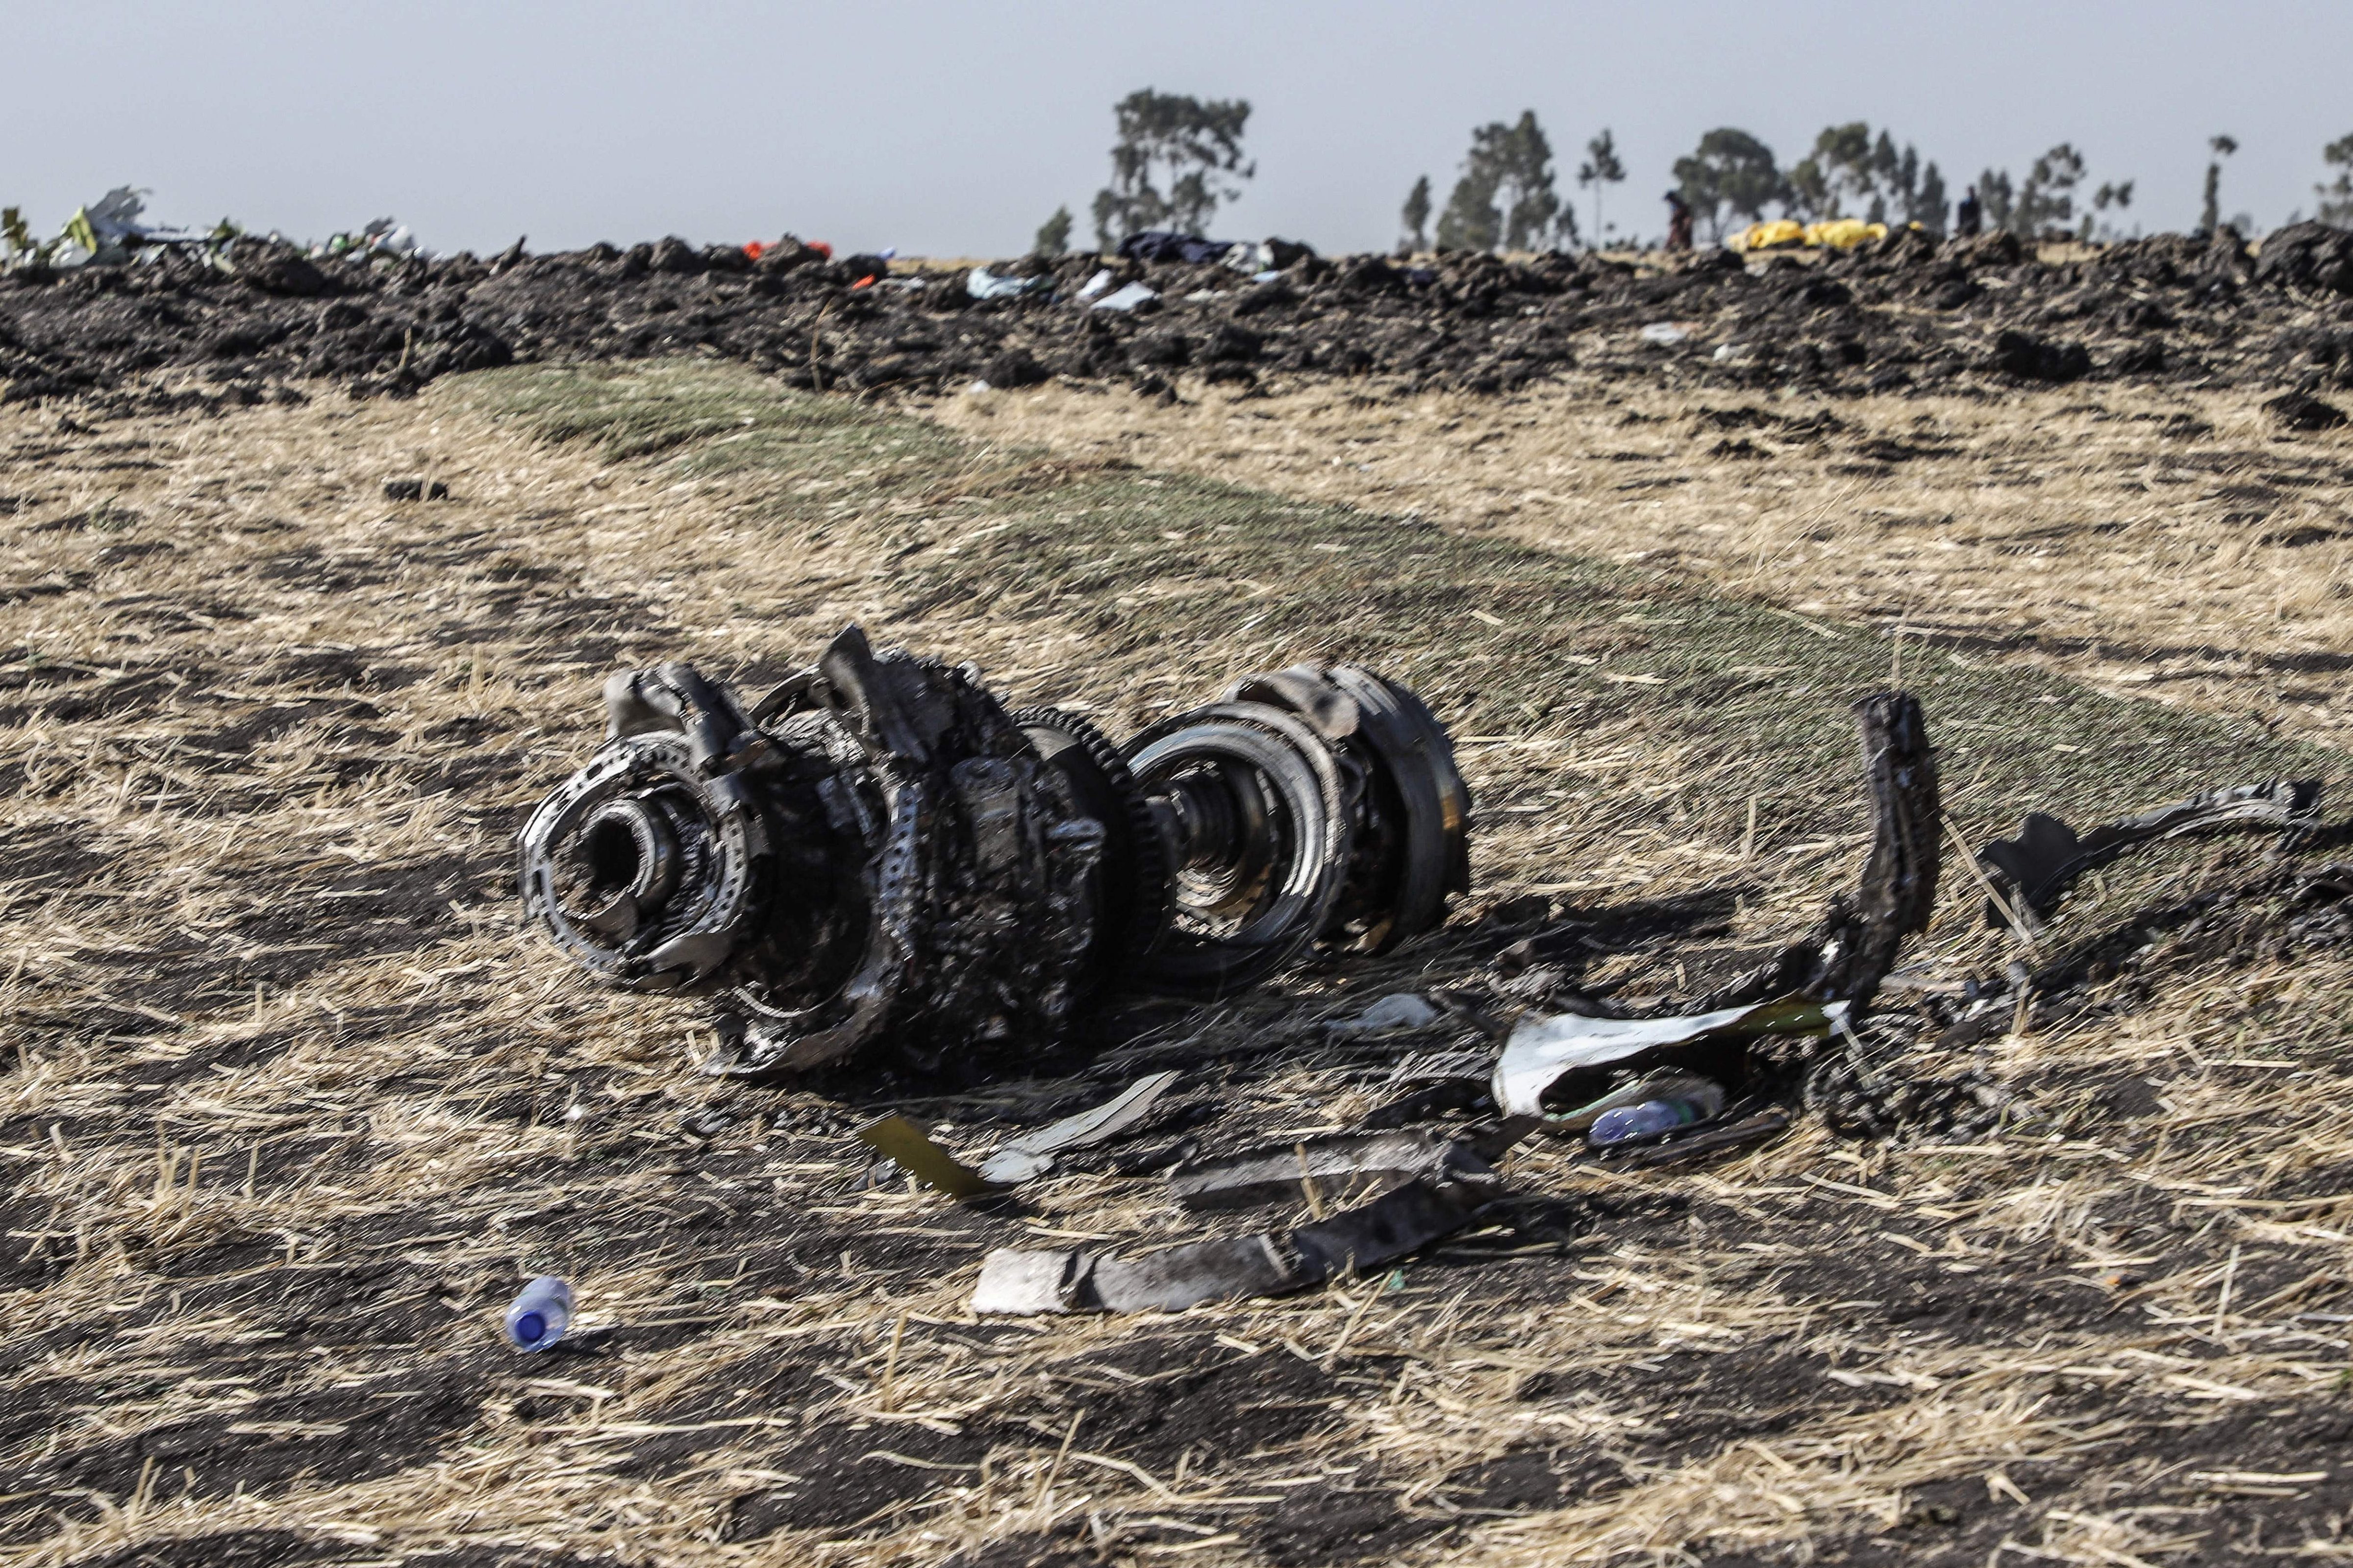 Debris from the crashed Ethiopia Airlines Flight 302 is seen near Bishoftu, southeast of Addis Ababa, Ethiopia on March 11, 2019. (Michael Tewelde&mdash;AFP/Getty Images)